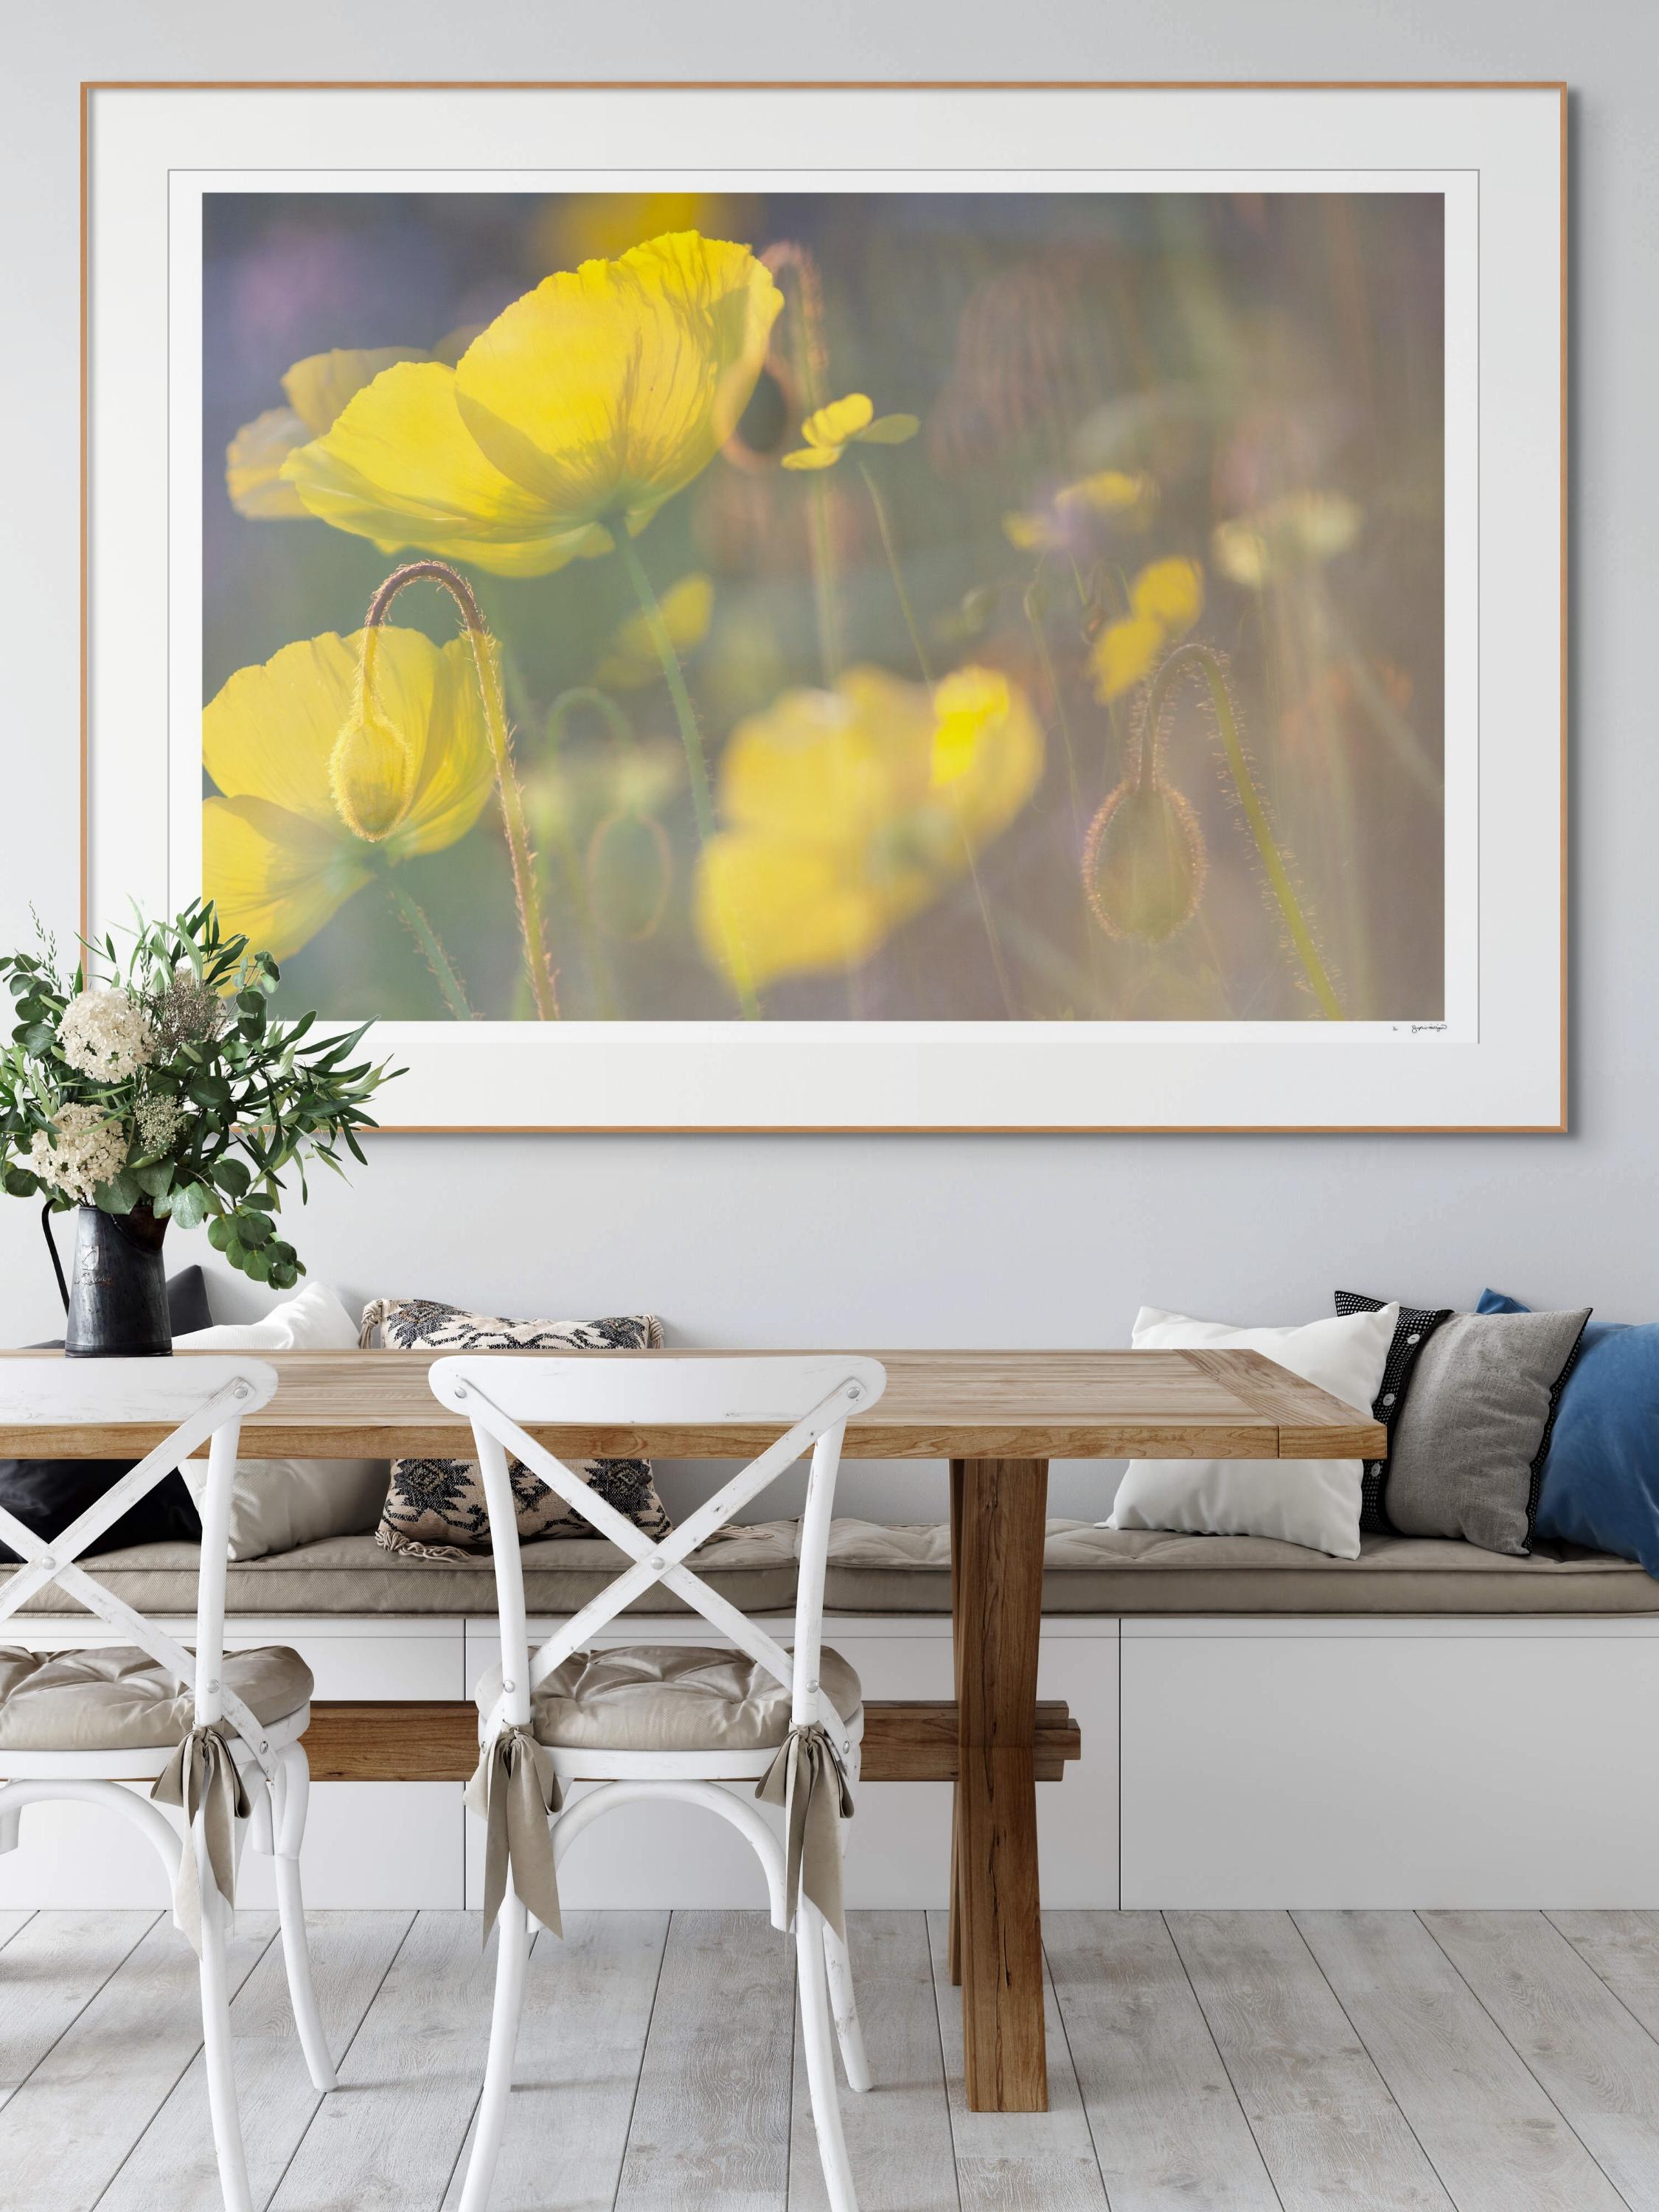 'Yellow Poppies' ('Mono No Aware' Series)
Limited edition archival photograph. Unframed, hand signed and numbered
_________________

Buds, blooms, and the fading glories of Icelandic poppies capture the glow of the late afternoon sun. Woven together